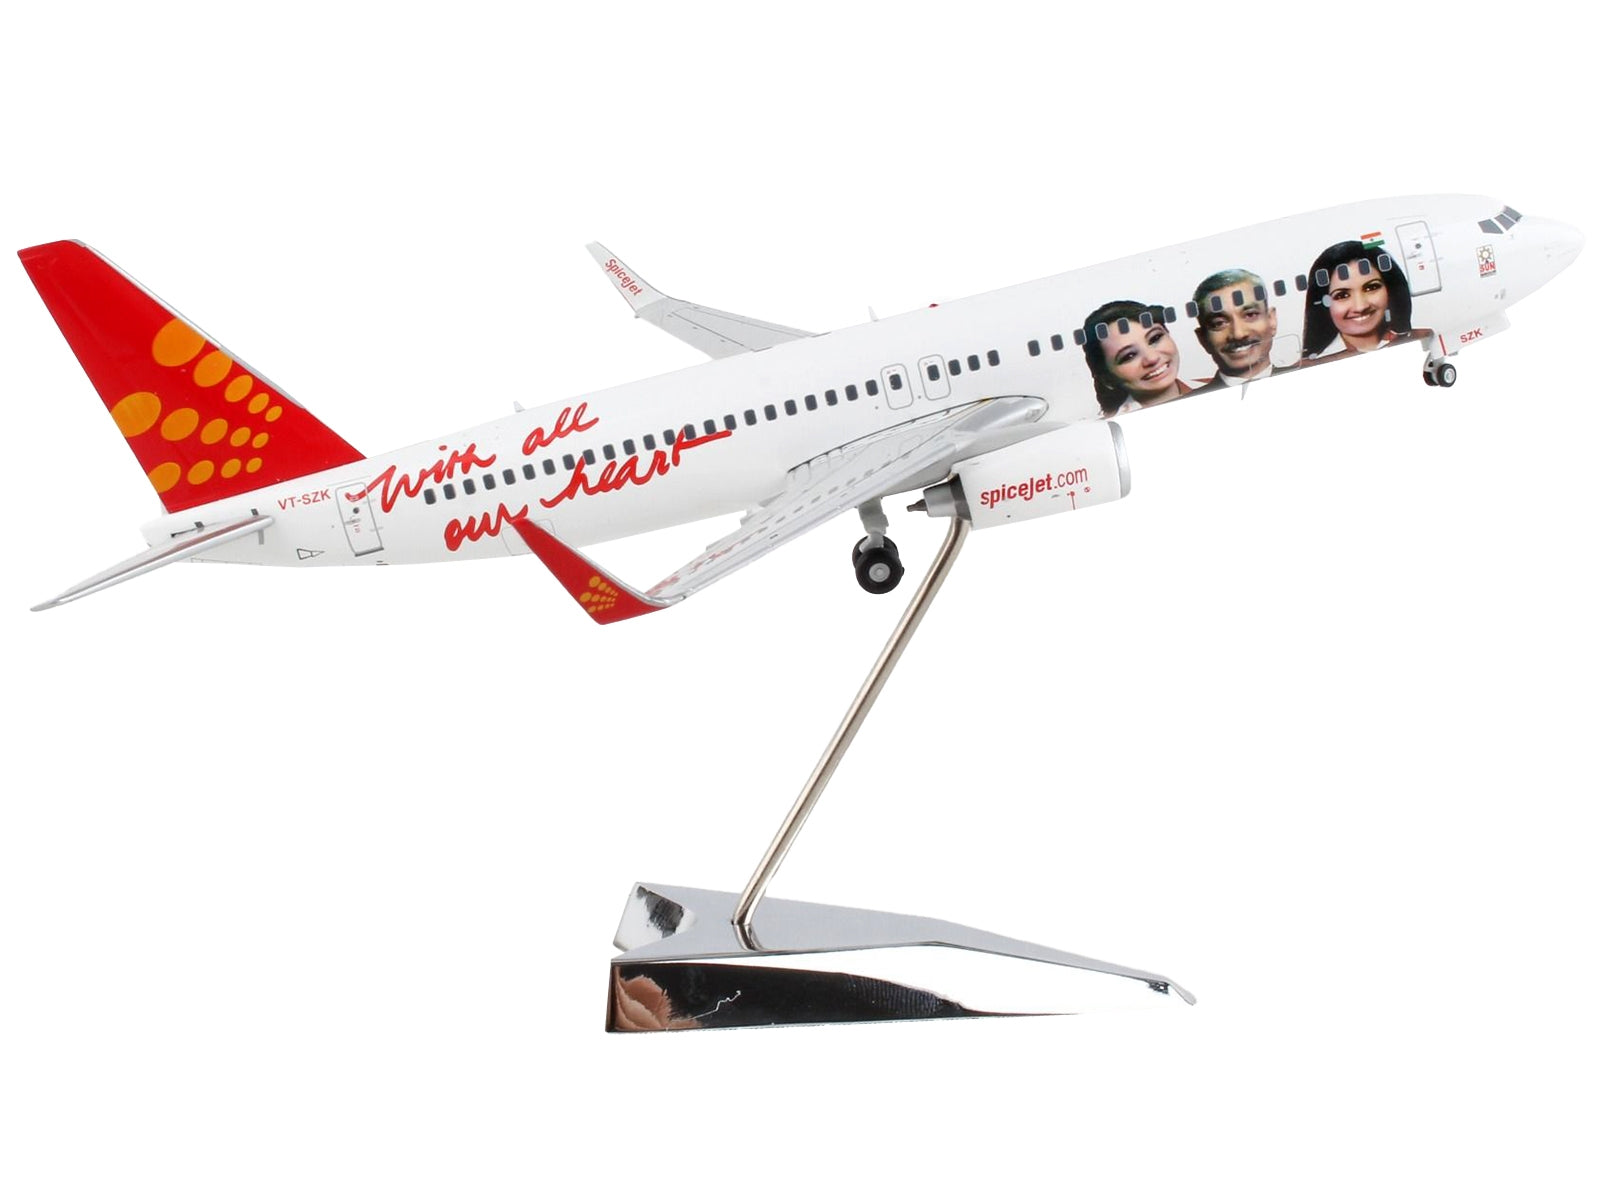 Boeing 737-800 Commercial Aircraft "SpiceJet" White with Red Tail "Gemini 200" Series 1/200 Diecast Model Airplane by GeminiJets